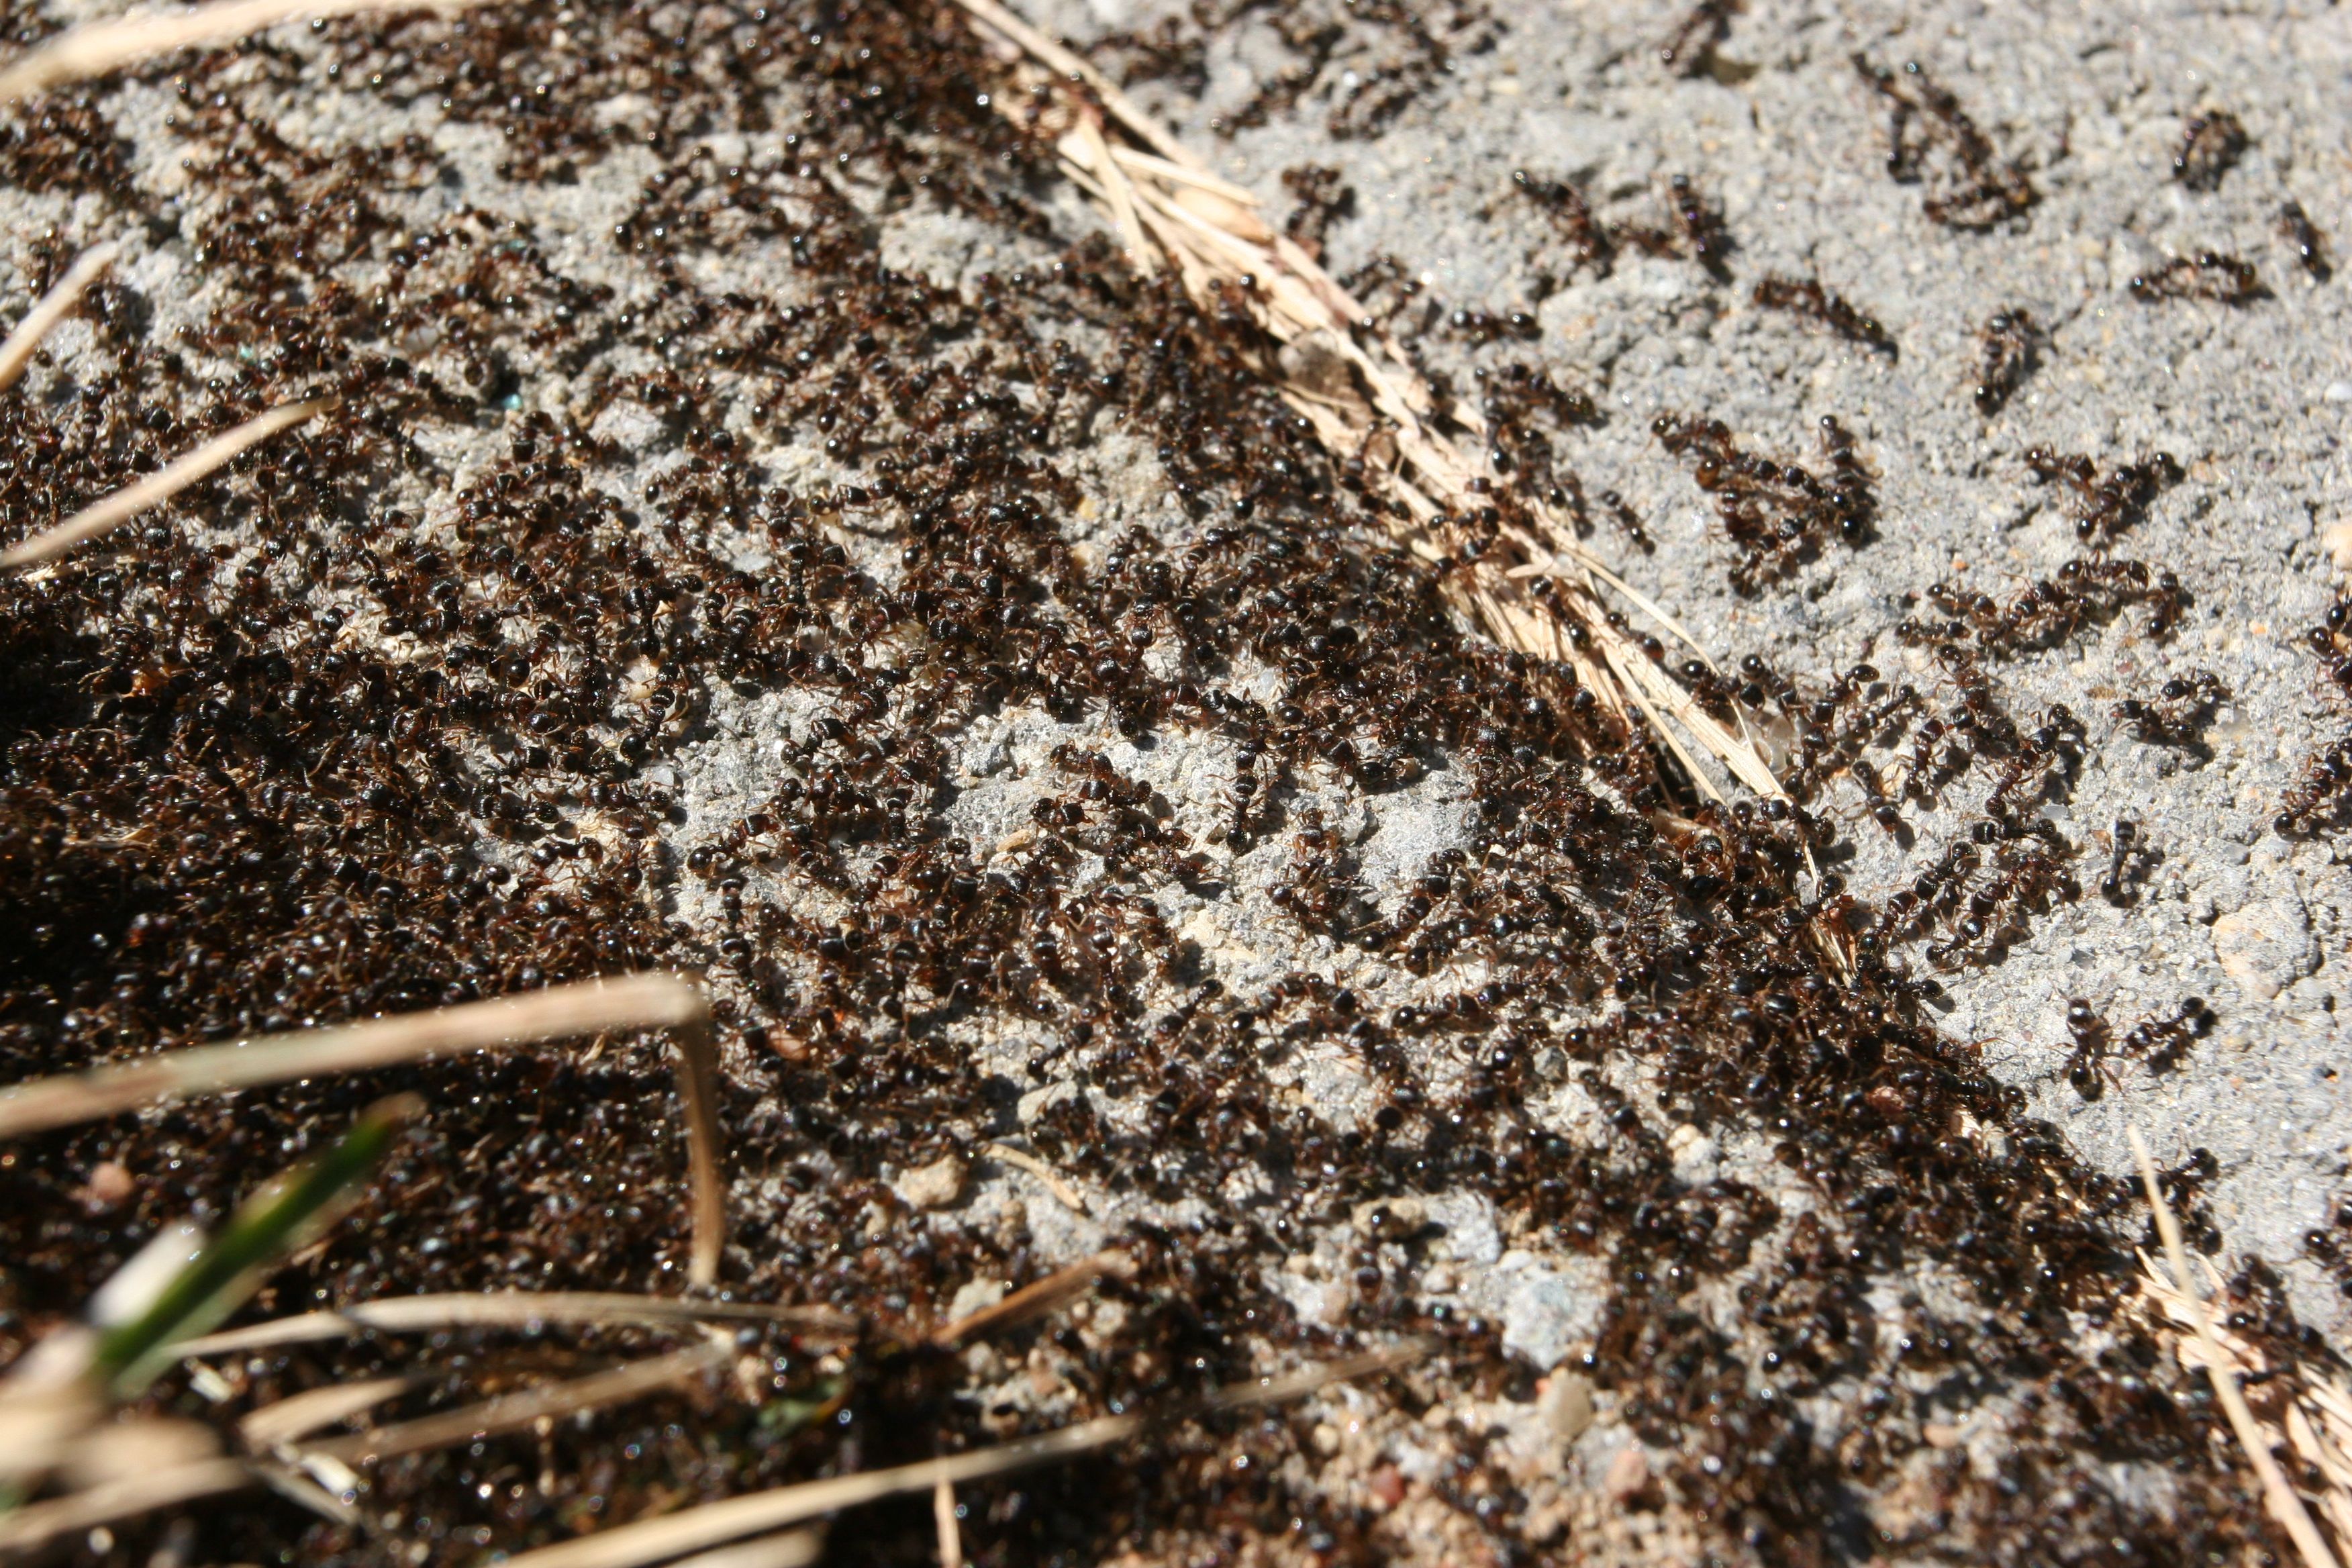 Ants! I have no idea what they were after, but there seemed to be something egging them on.